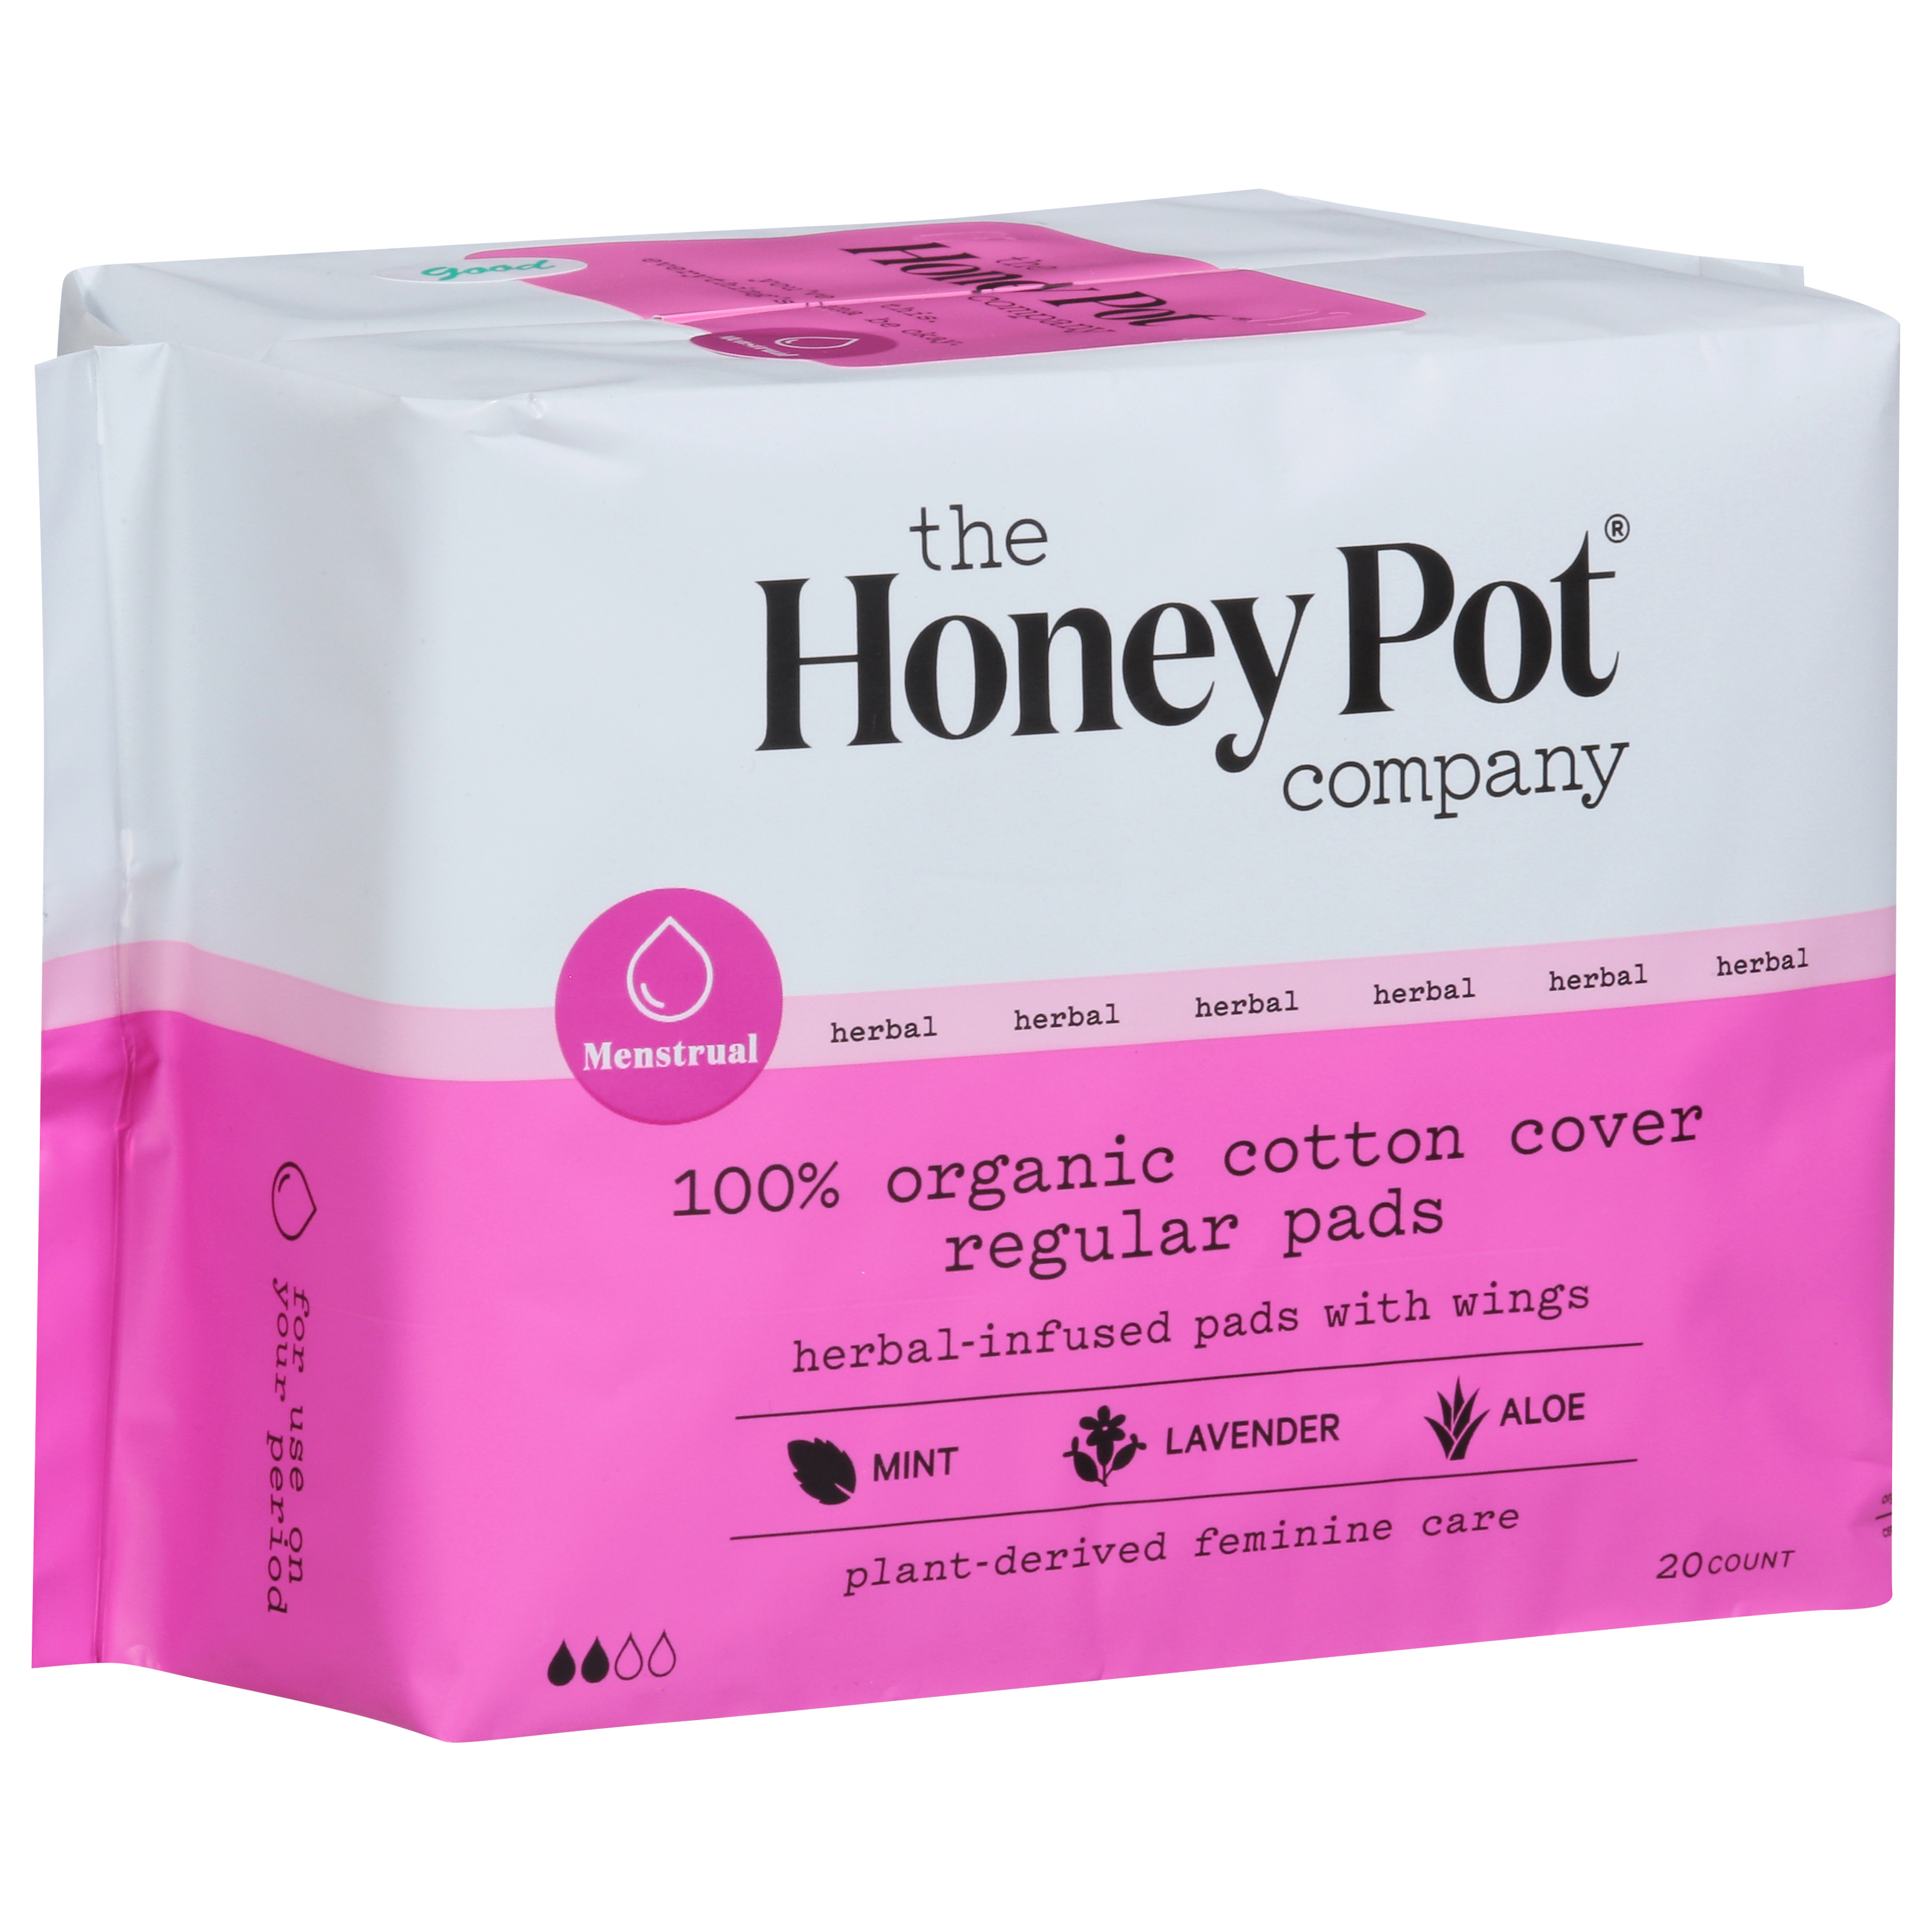 The Honey Pot Company, 100% Organic Cotton Cover Heavy Flow Overnight Pads